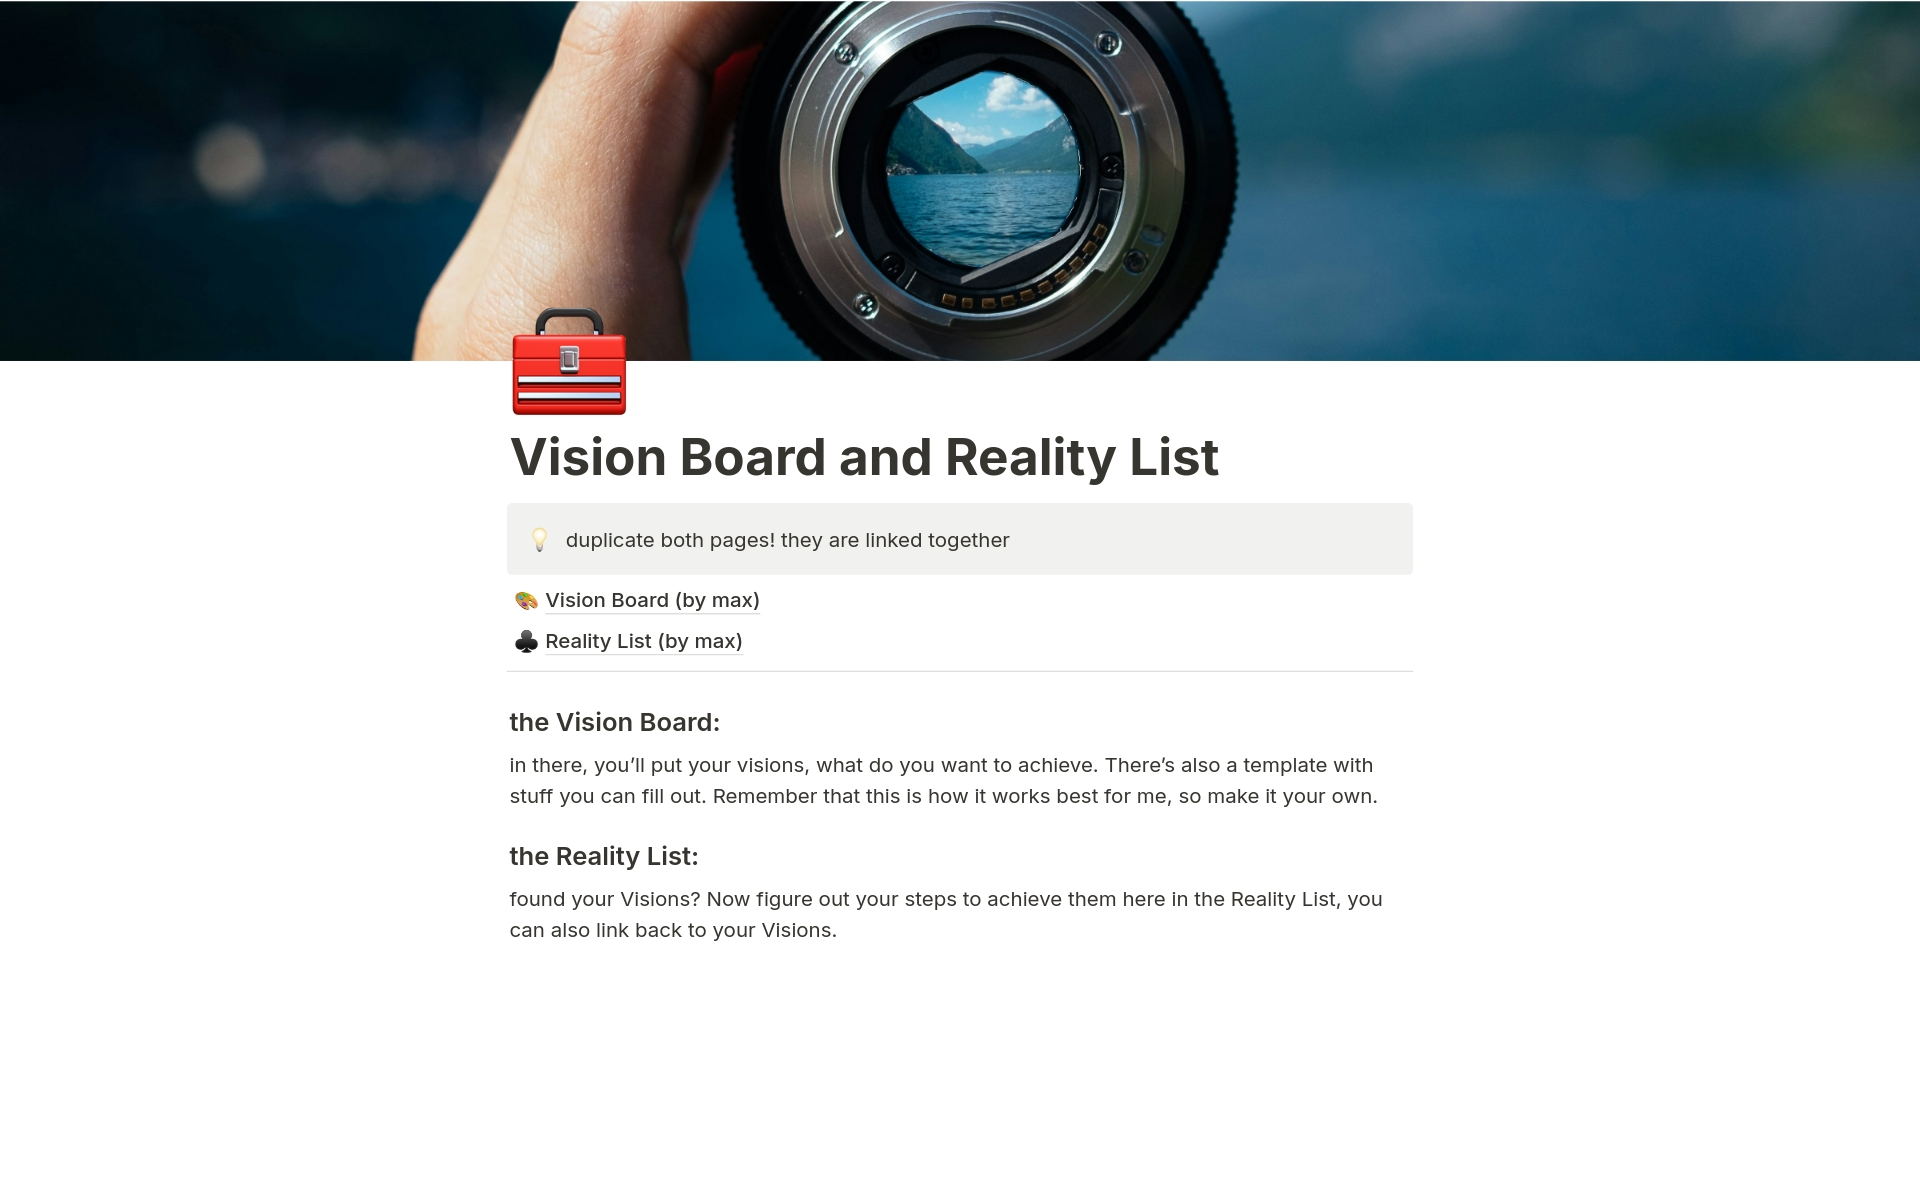 A Vision Board to fulfill your dreams and a Reality List to put in a step-by-step To-Do-List